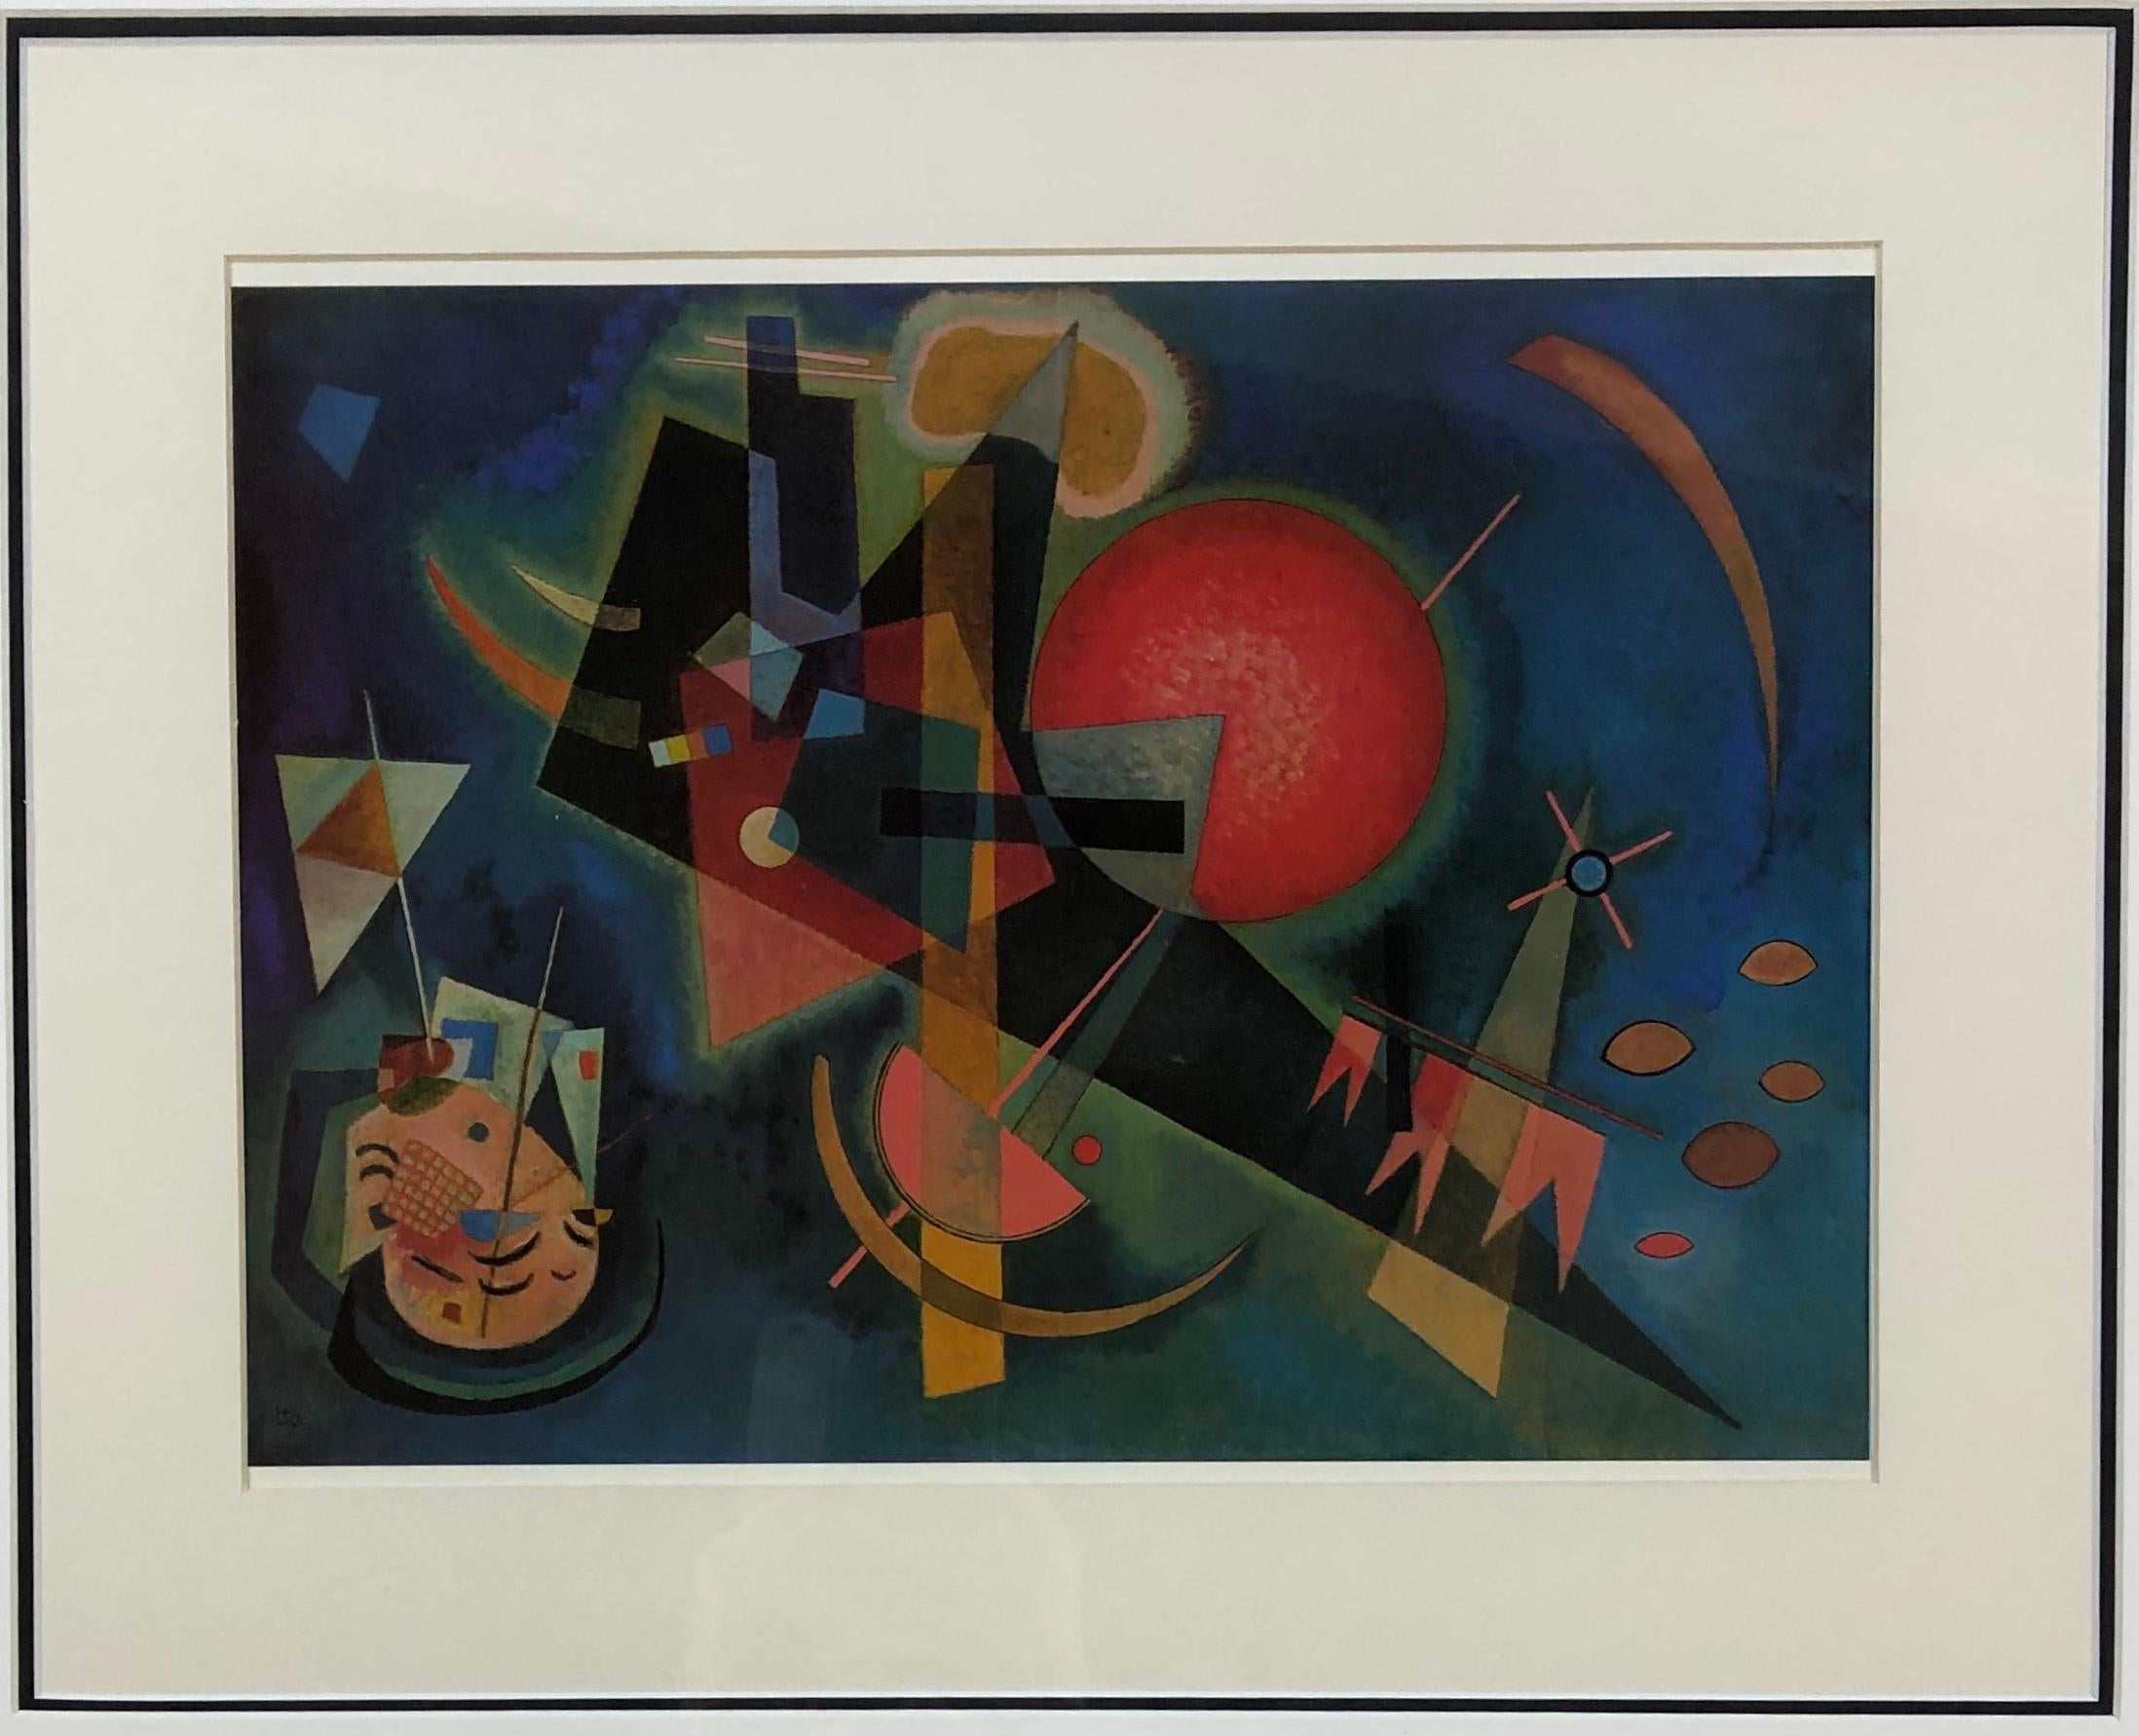 Wassily Kandinsky print professionally framed. 
Titled: In The Blue, original painted in 1925, a variety of geometrically inspired forms balanced on a gigantic scale within the dark blue field.

This is a cut-out from the 1990 edition published